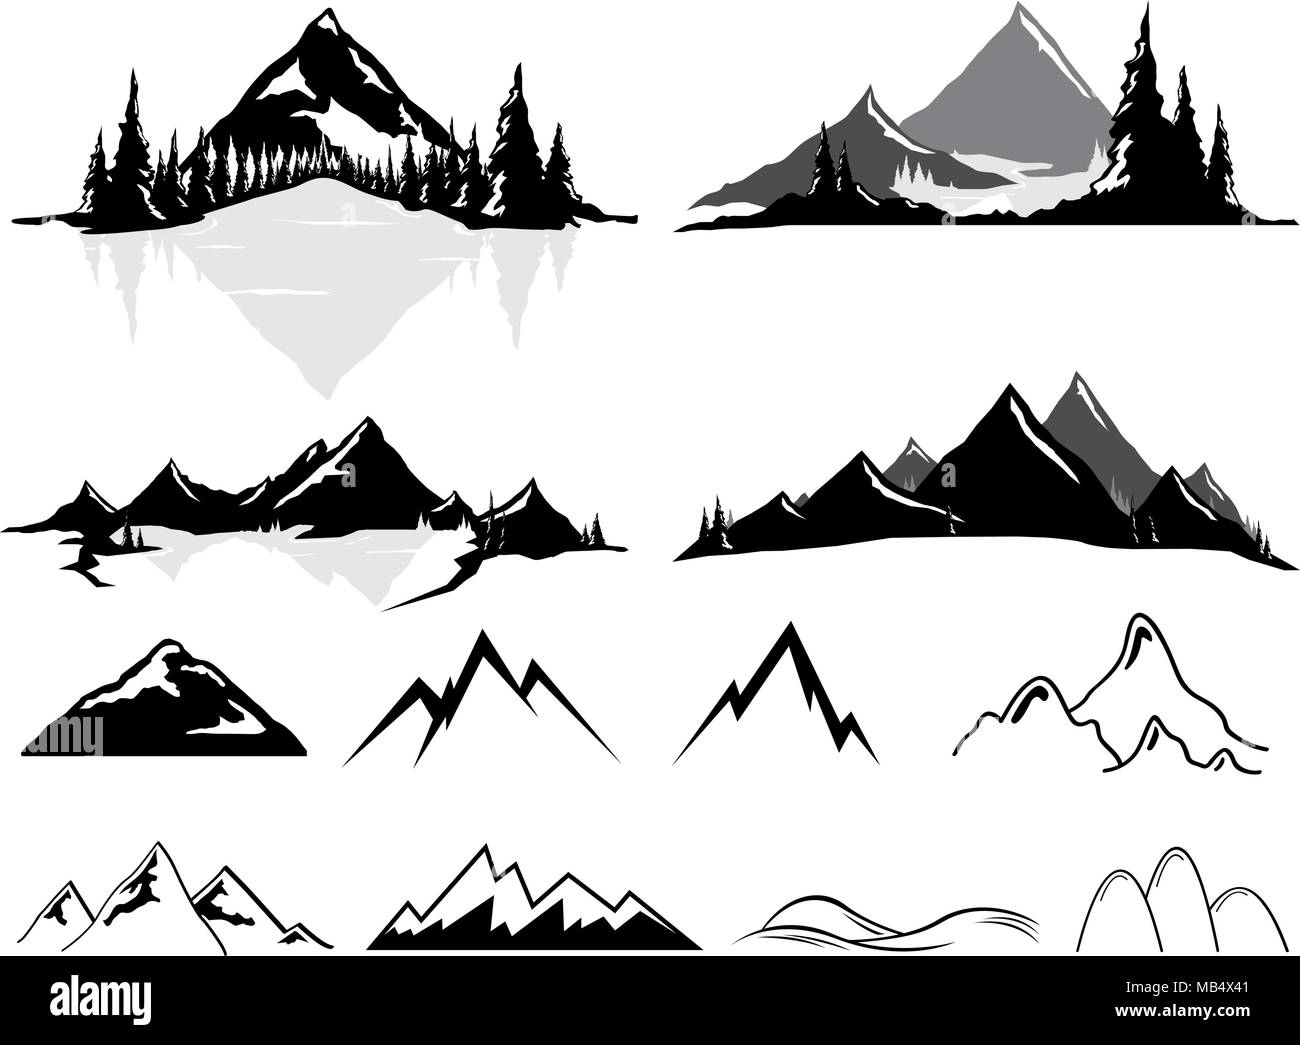 Various vector illustrations of mountains and hills, some realistic, some stylized. All objects can be ungrouped and easily moved around. Stock Vector